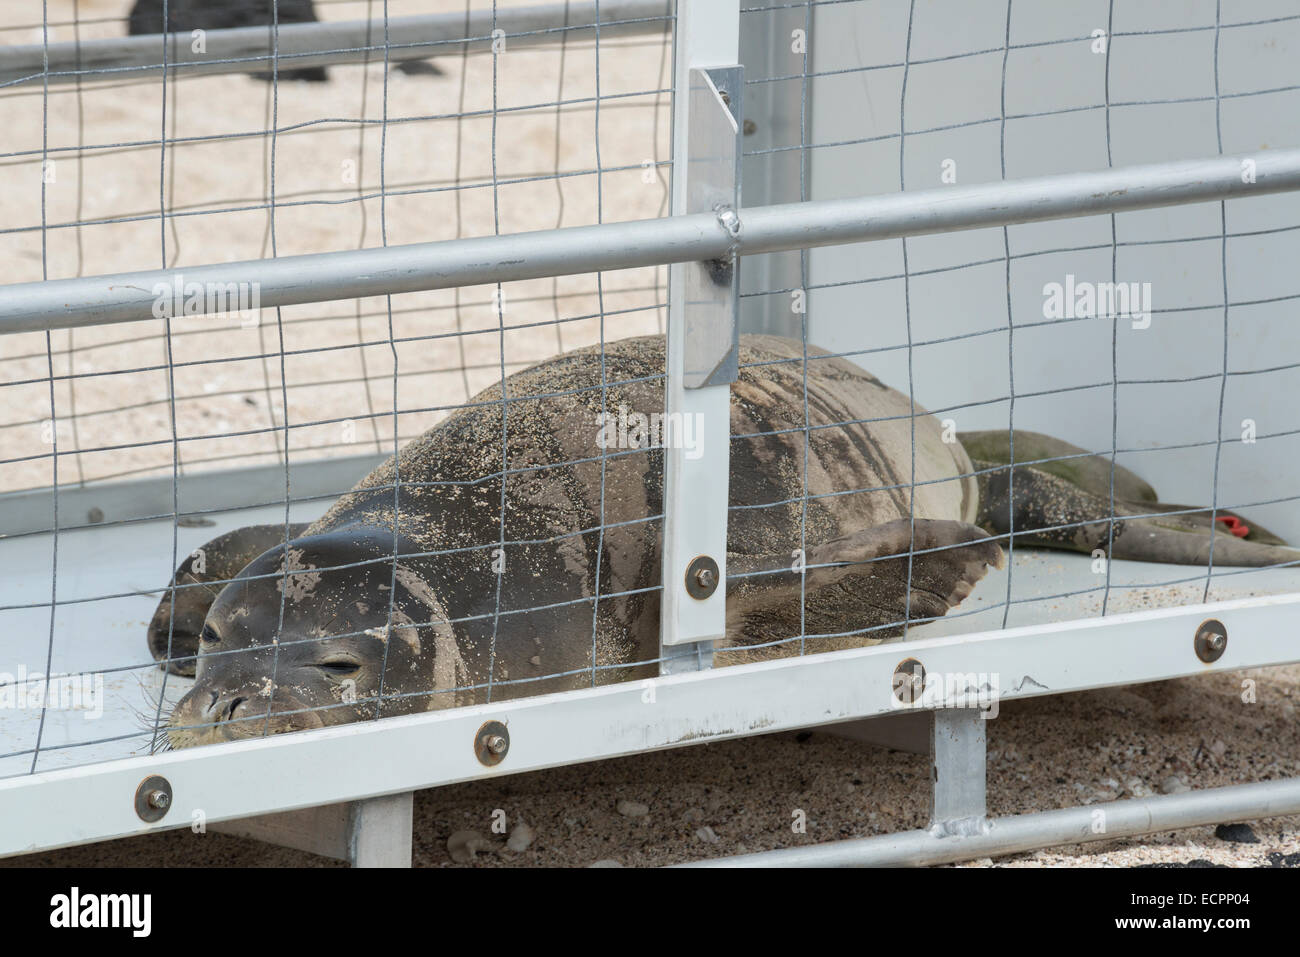 a problem juvenile Hawaiian monk seal, rests in a holding pen after capture, awaiting relocation to an area away from humans Stock Photo